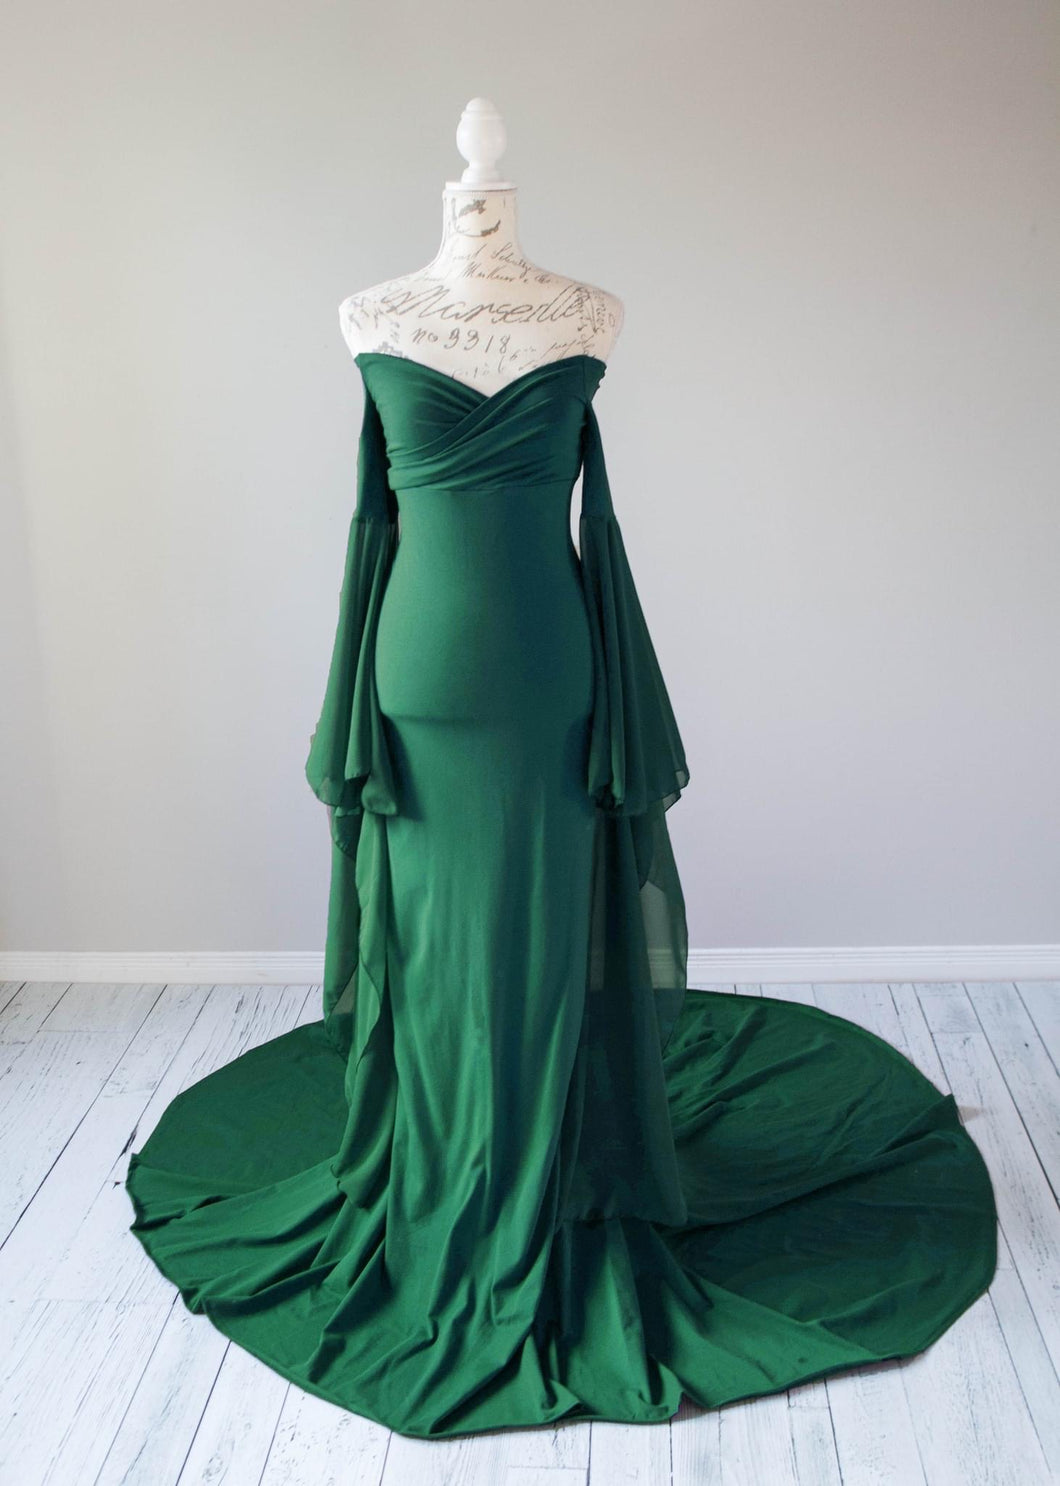 An emerald green maternity photoshoot gown. You can rent or buy this dress for your pregnancy.